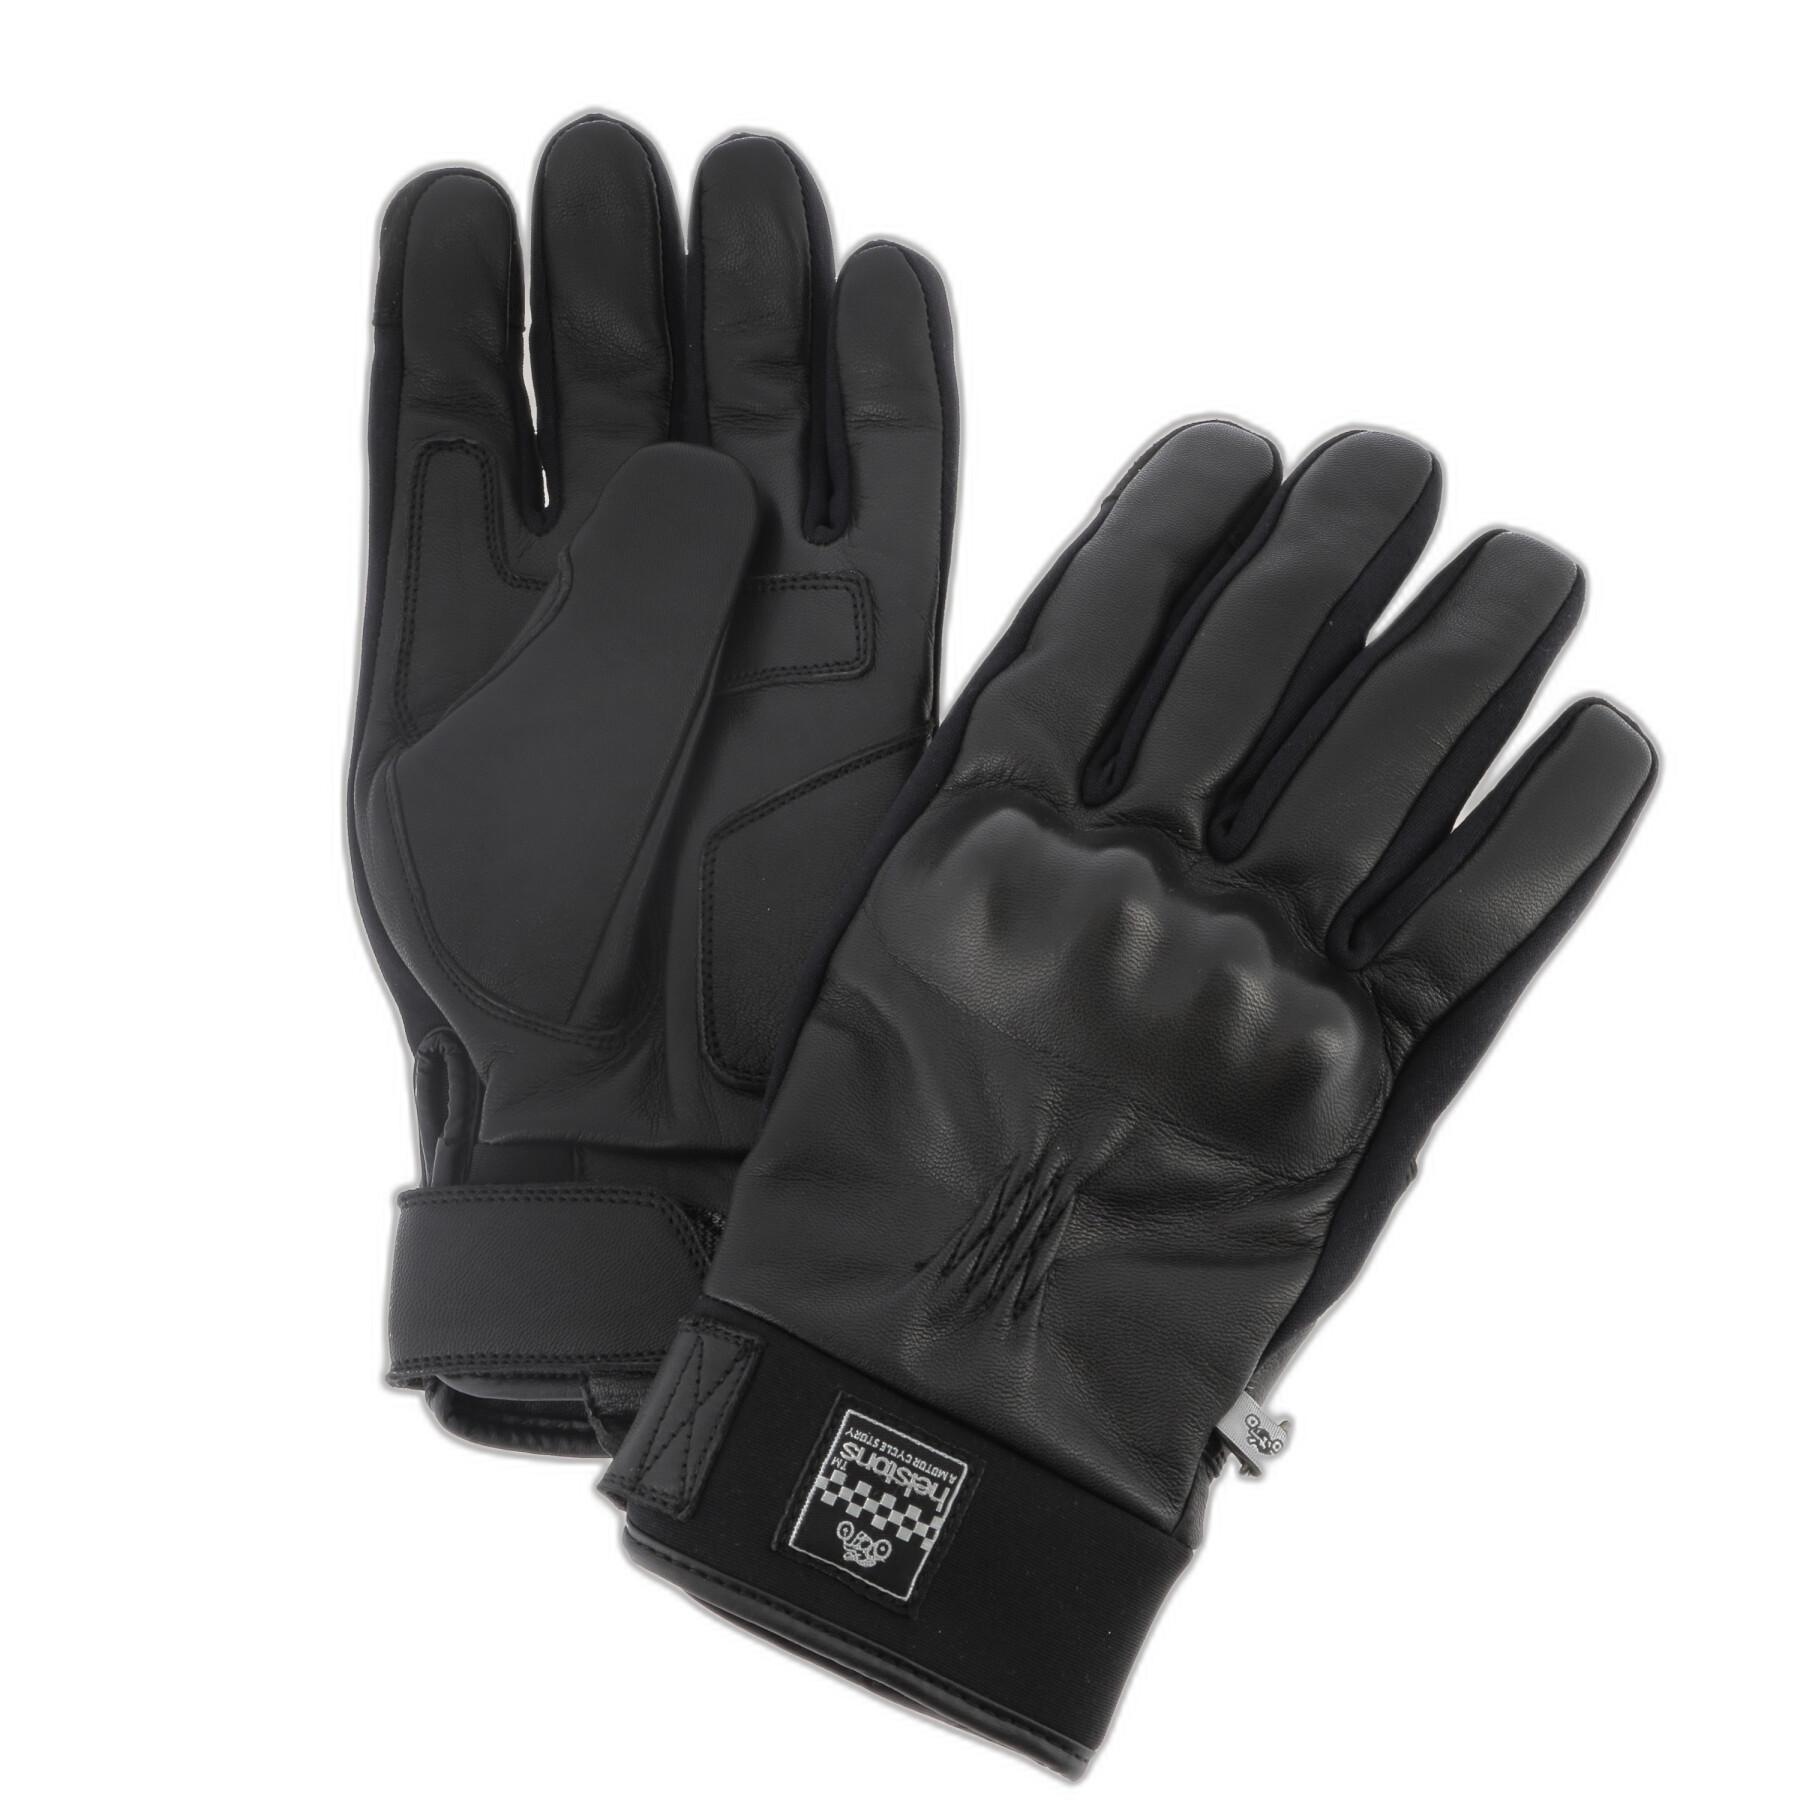 Winter leather motorcycle gloves Helstons Justin